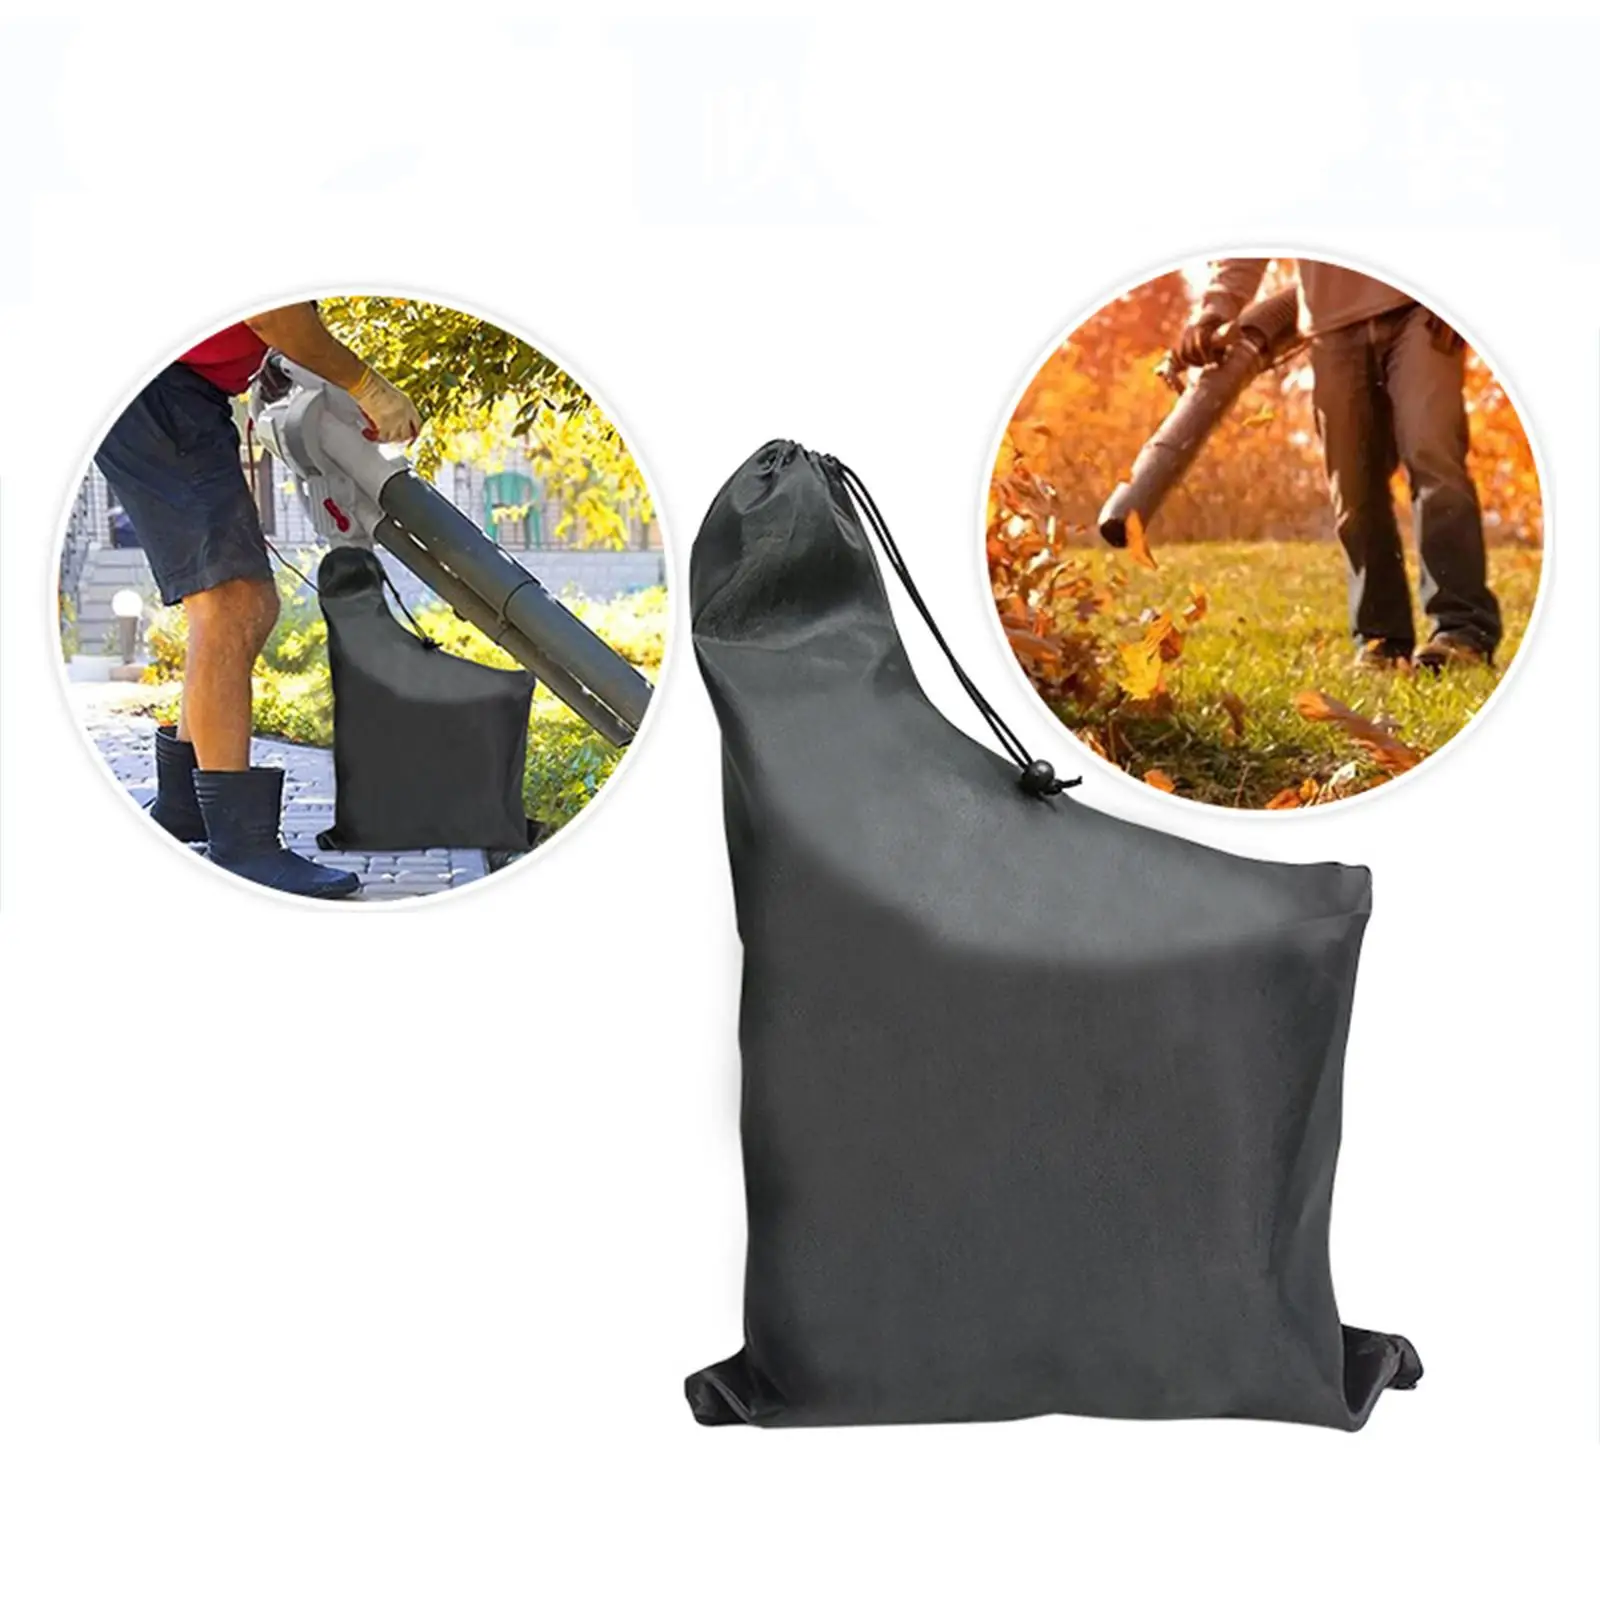 Fallen Leaves Collection Bag Waste Bags Replacement Lawn Vacuum Bag